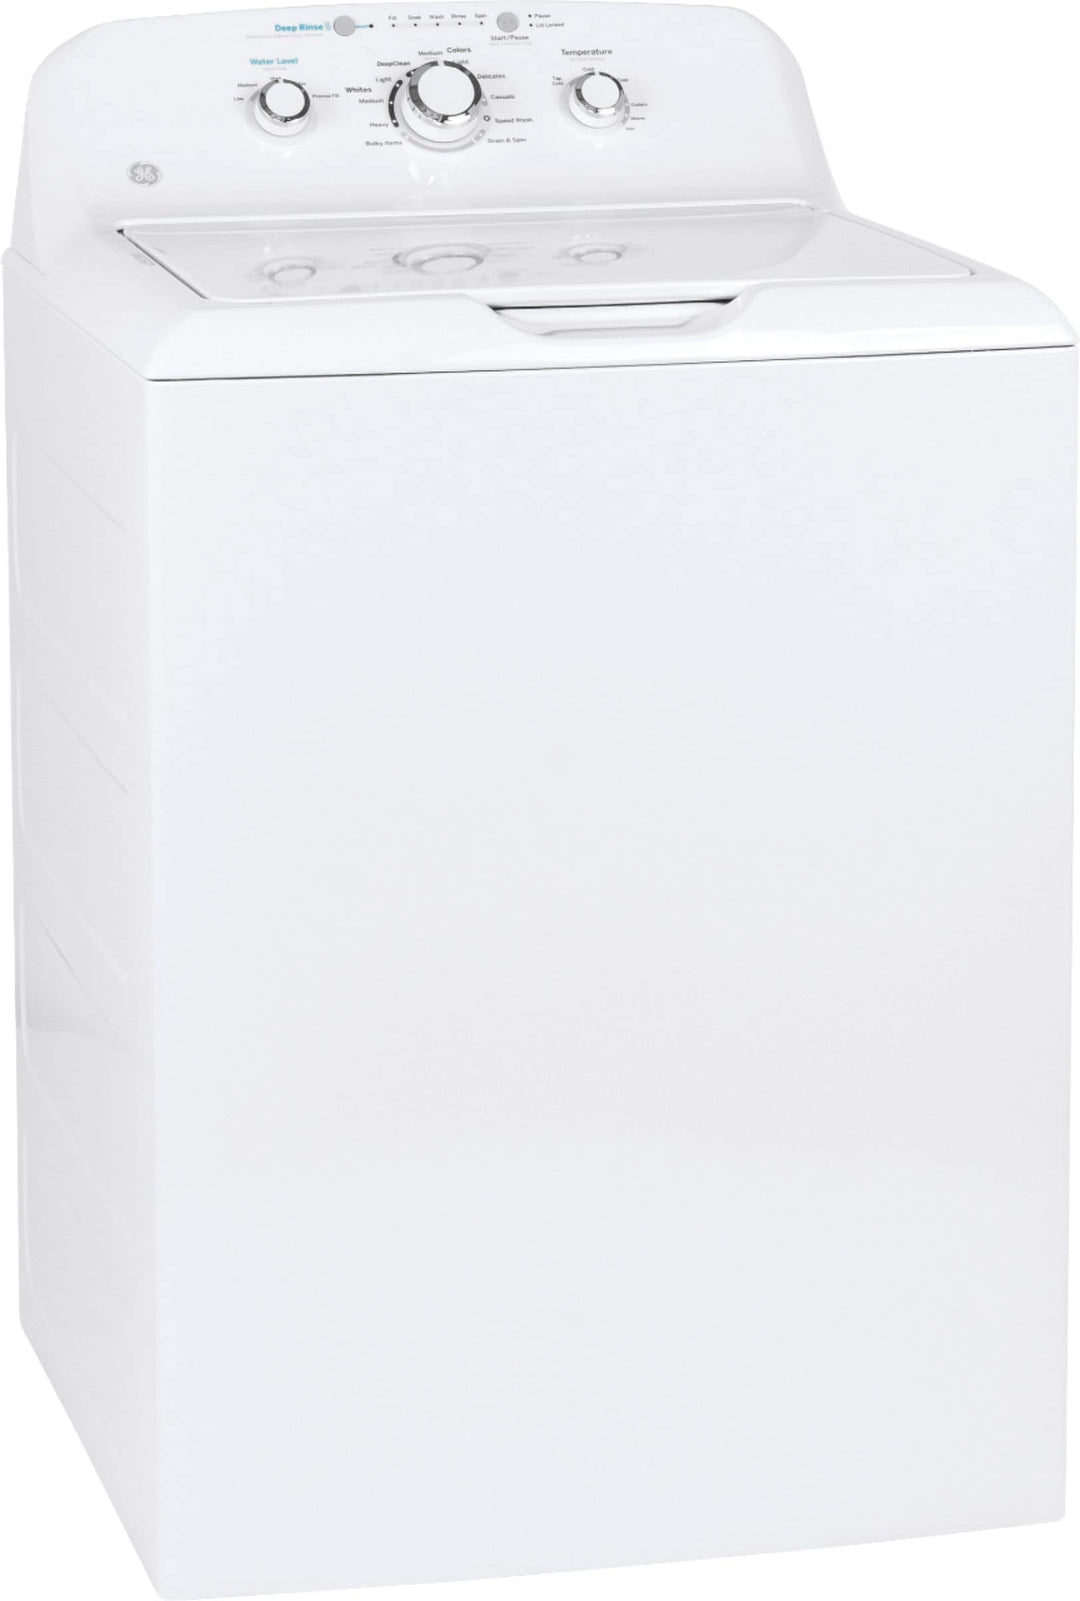 GE - 4.2 Cu. Ft. Top Load Washer with Precise Fill & Deep Rinse - White on white_1